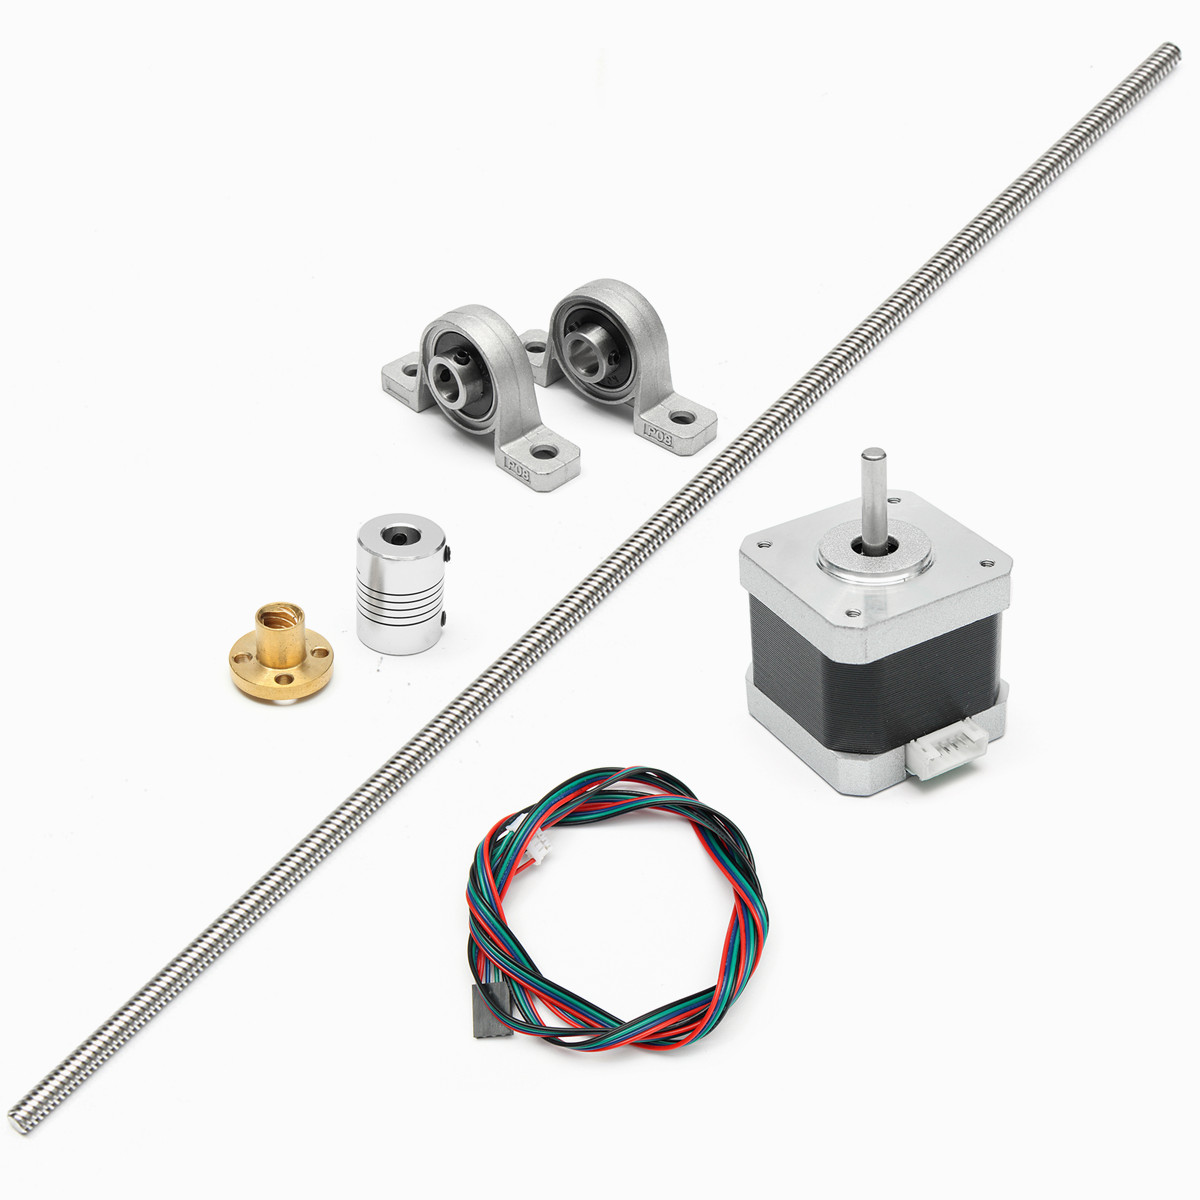 T8 600mm Stainless Steel Lead Screw Coupling Shaft Mounting + Motor For 3D Printer 11